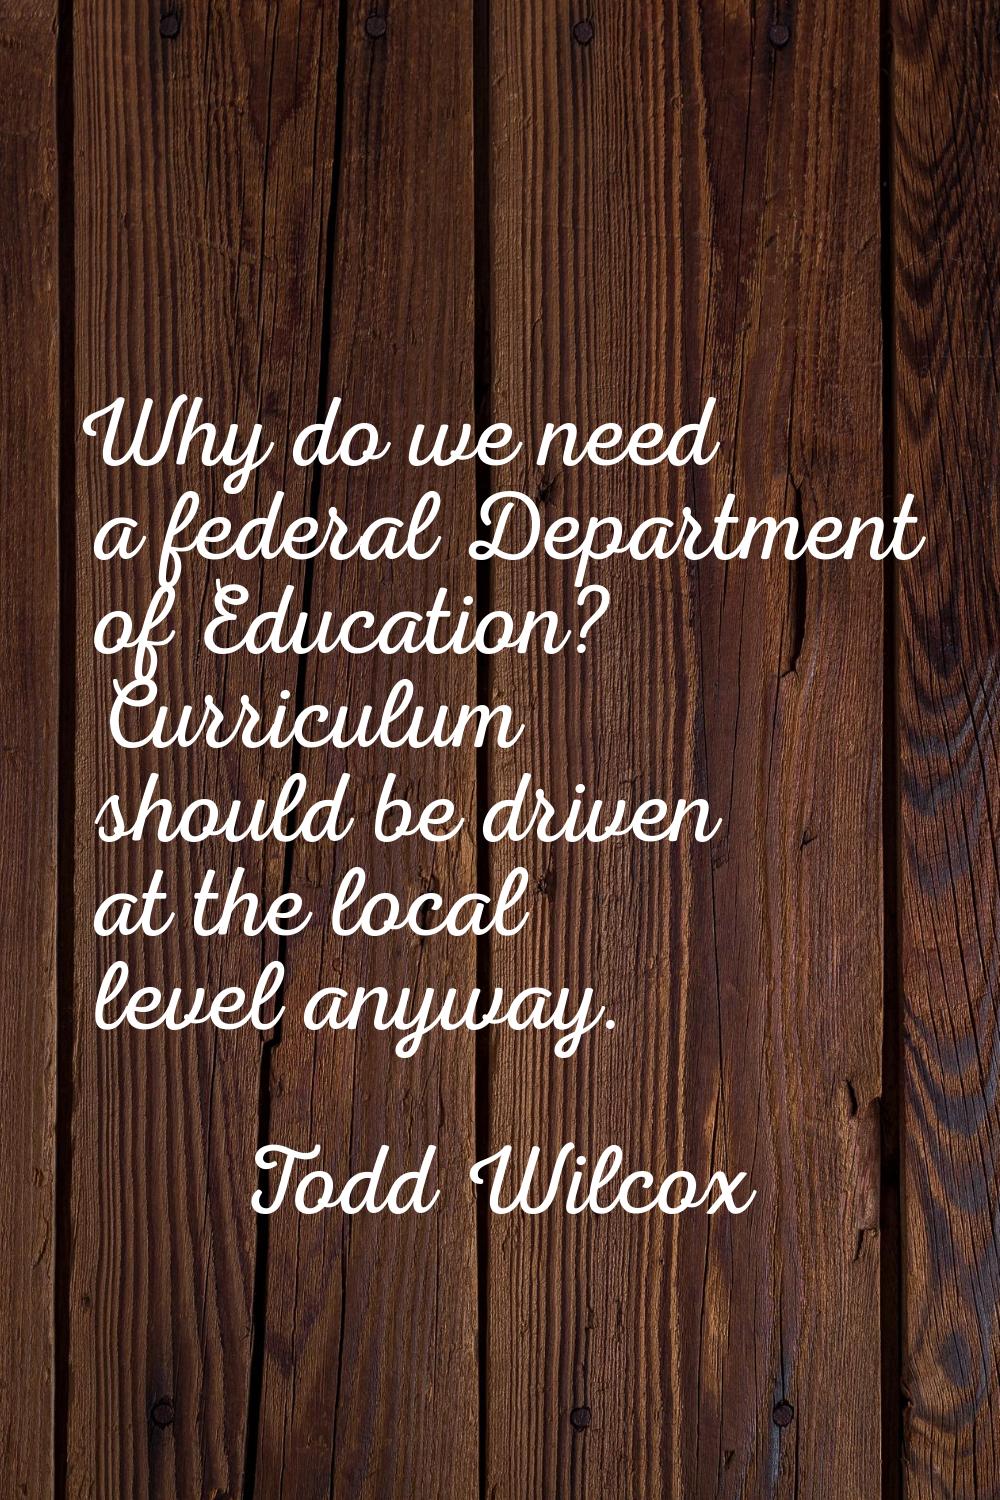 Why do we need a federal Department of Education? Curriculum should be driven at the local level an